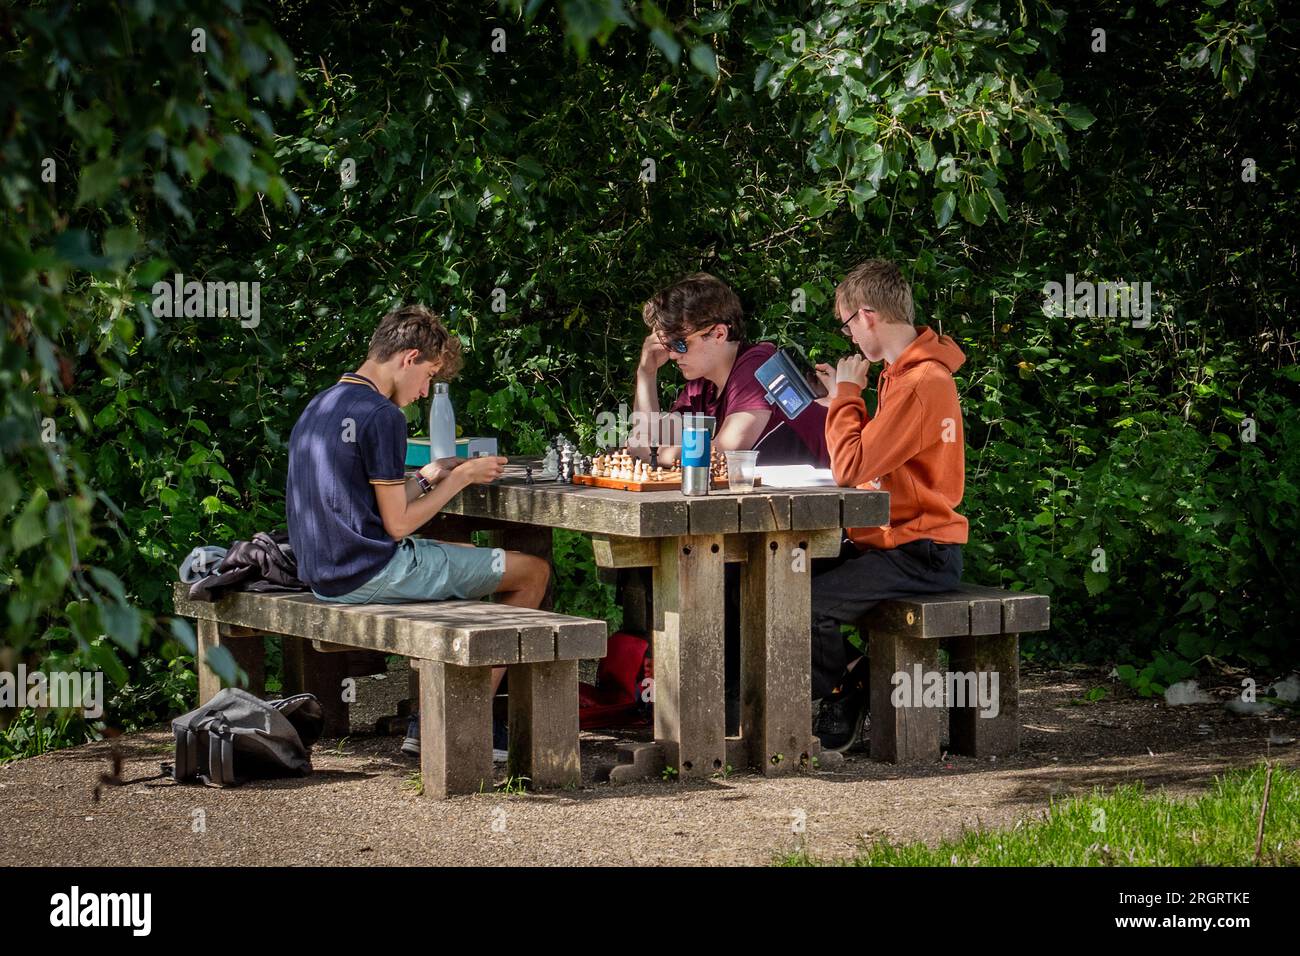 Teenagers playing chess outdoors in a park on a summer afternoon. Concept, lifestyle, culture, abstract. Stock Photo